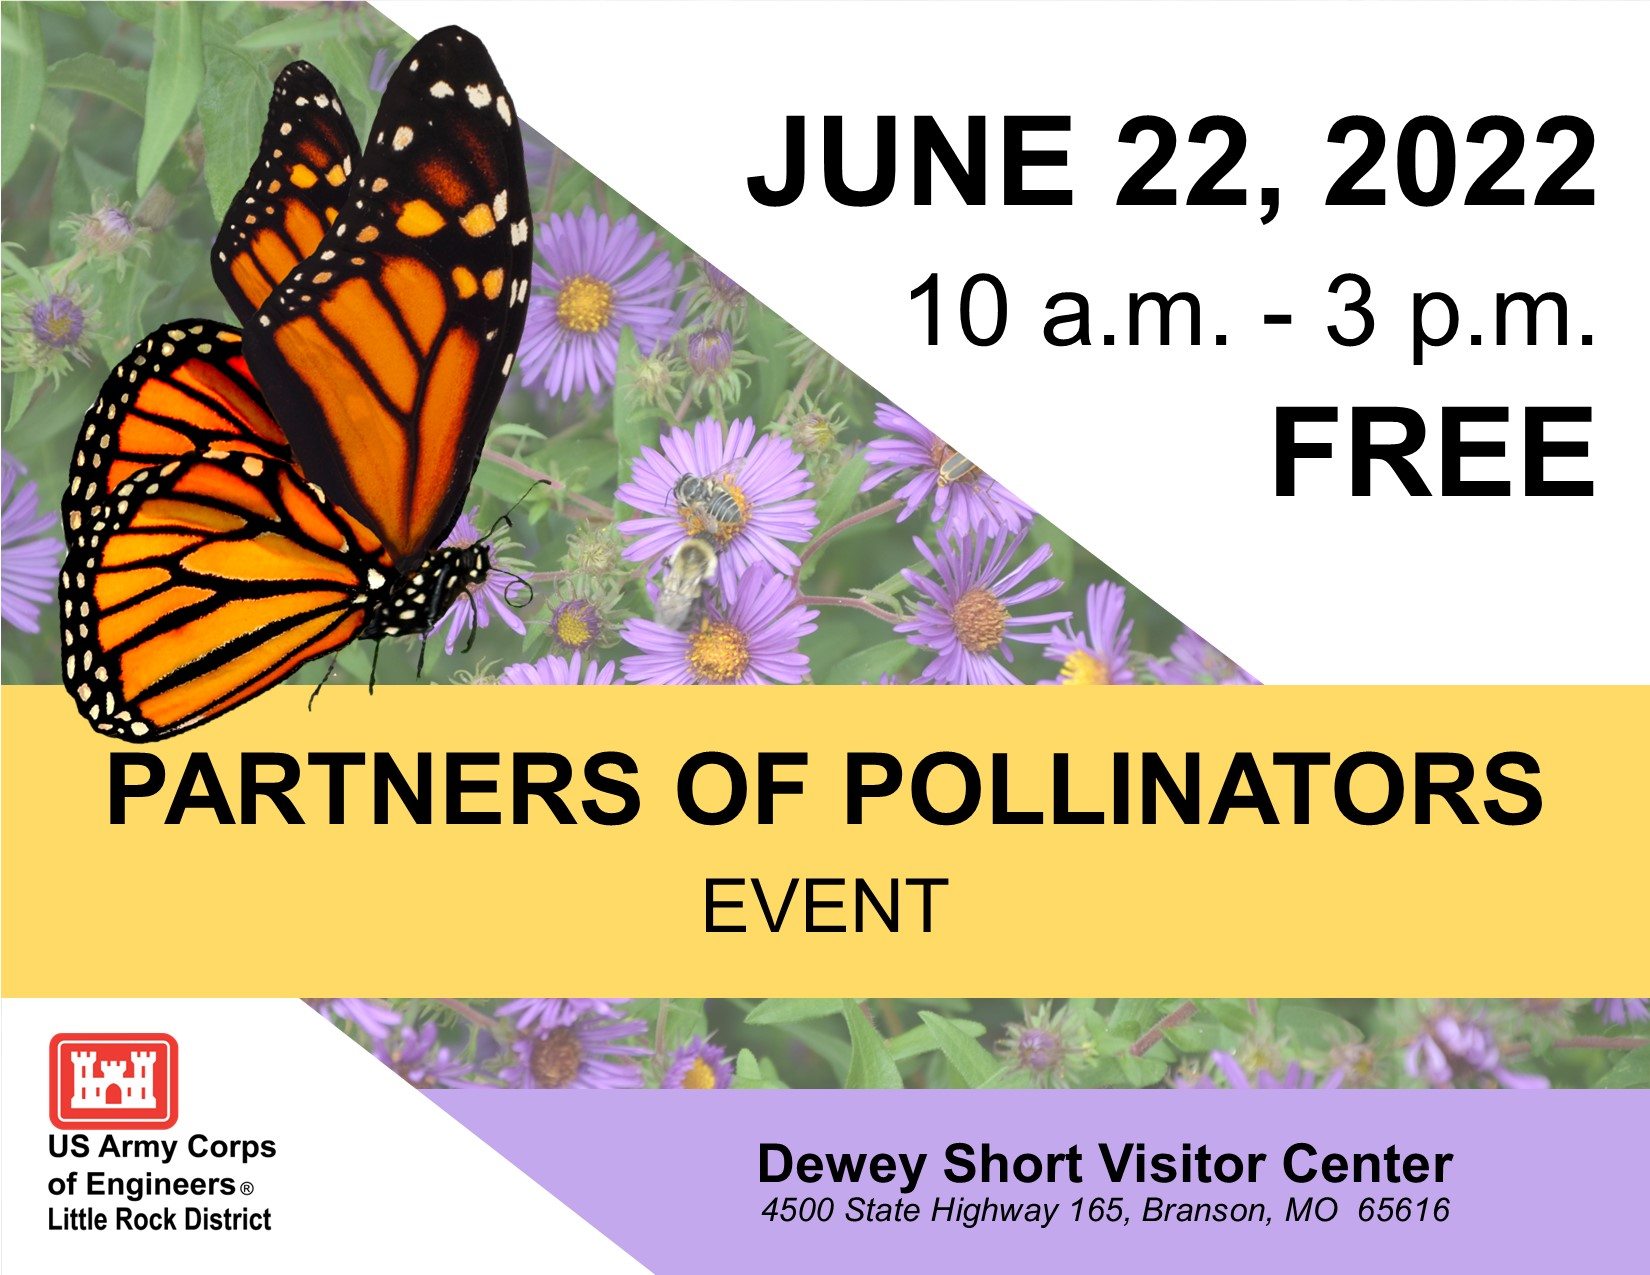 Partners of Pollinators National Pollinator Week and Great Outdoors Month